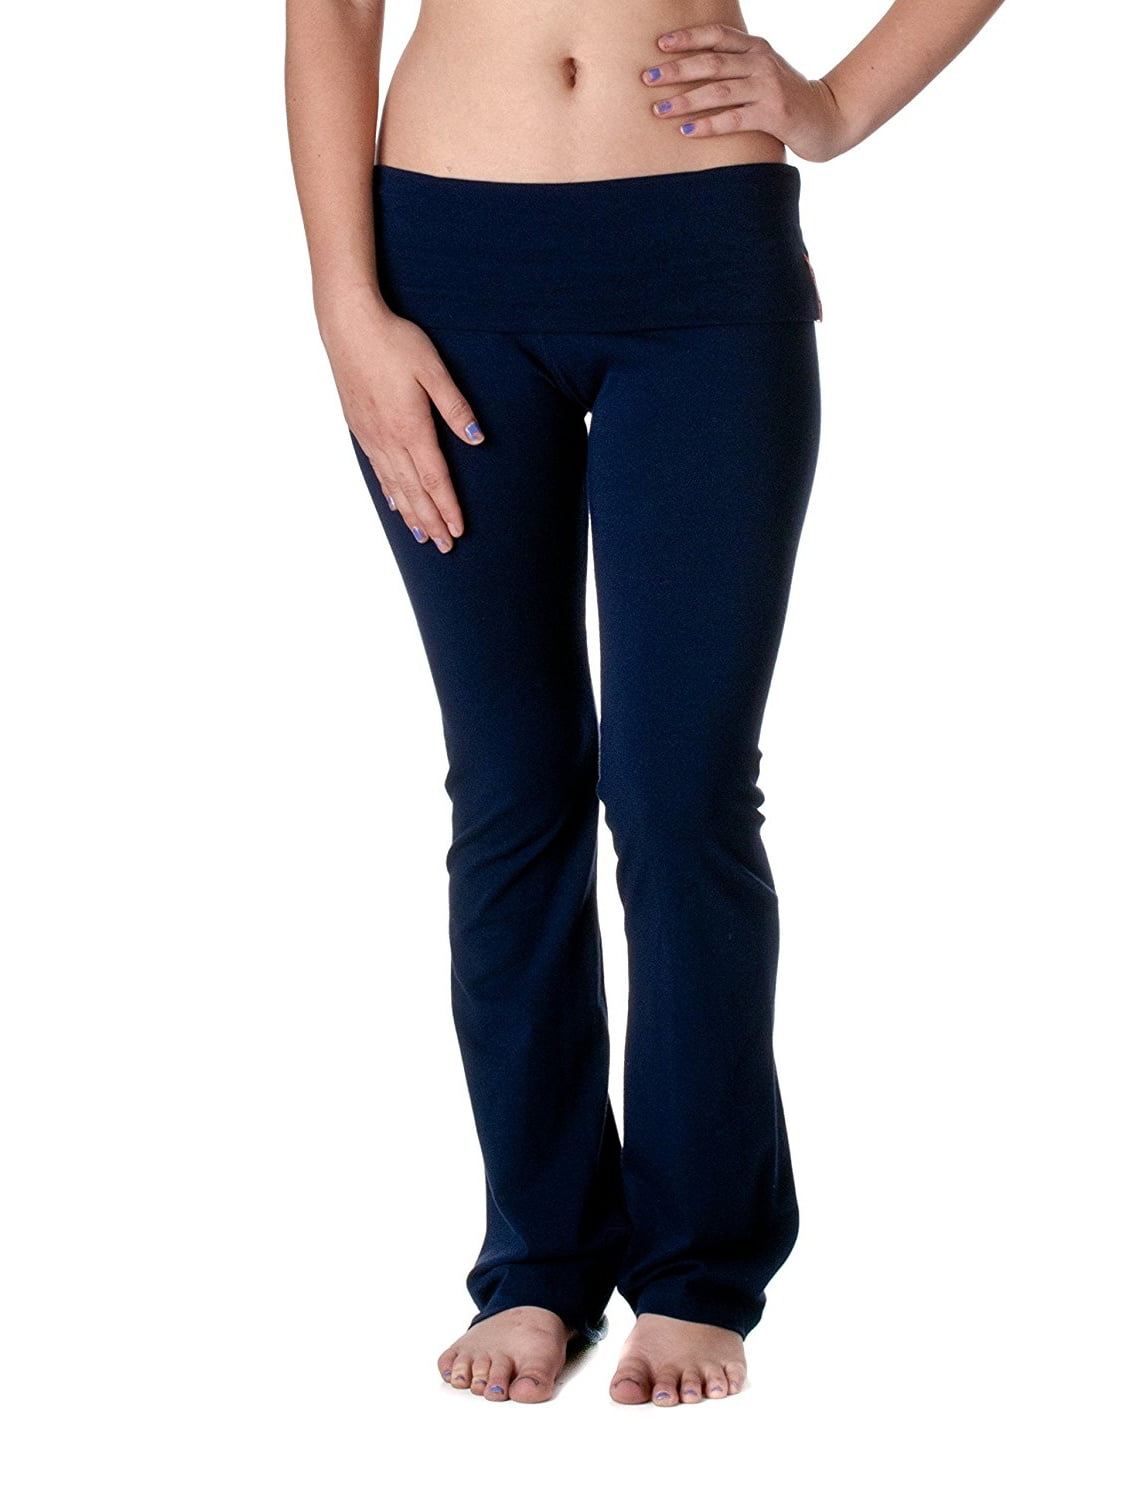 Casual Active Basic Women's Slimming Foldover Bootleg Flare Yoga Pants -  Junior and Plus Sizes 